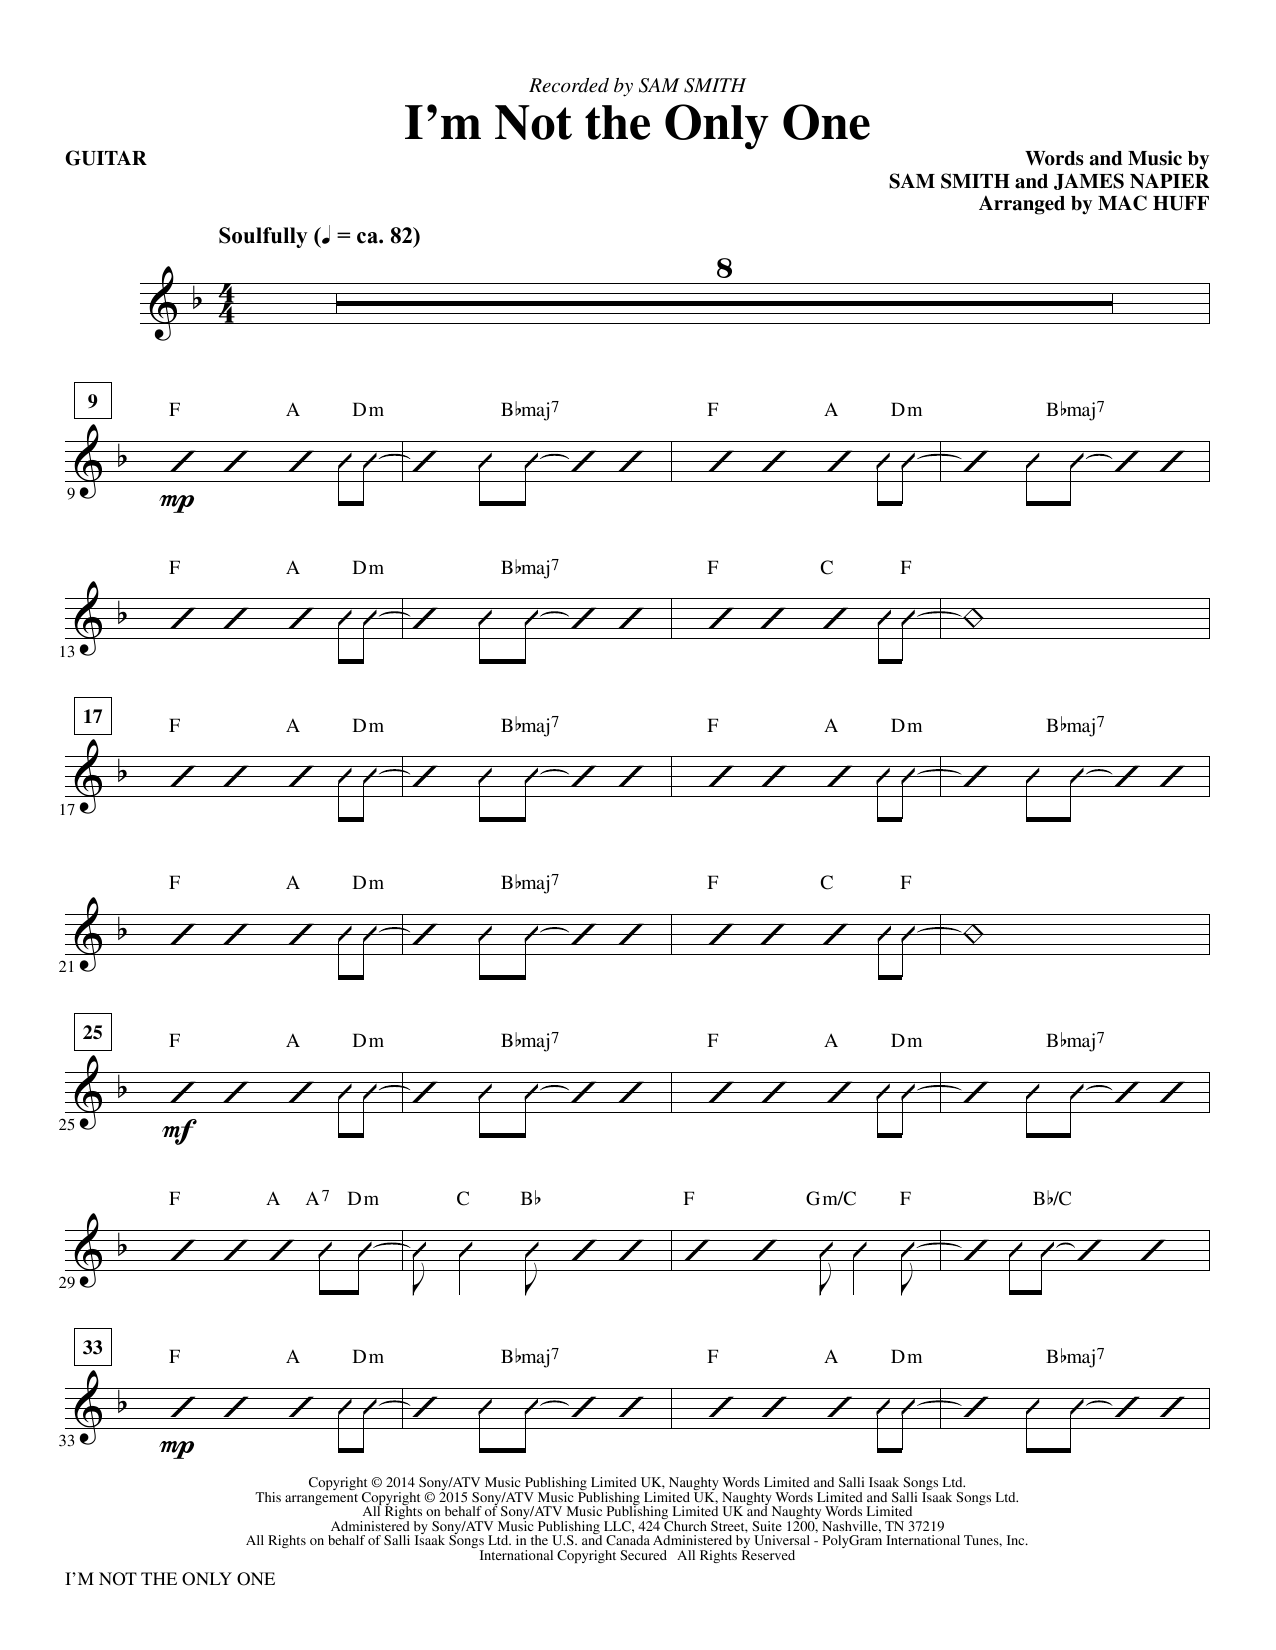 Mac Huff I'm Not the Only One - Guitar sheet music notes and chords. Download Printable PDF.